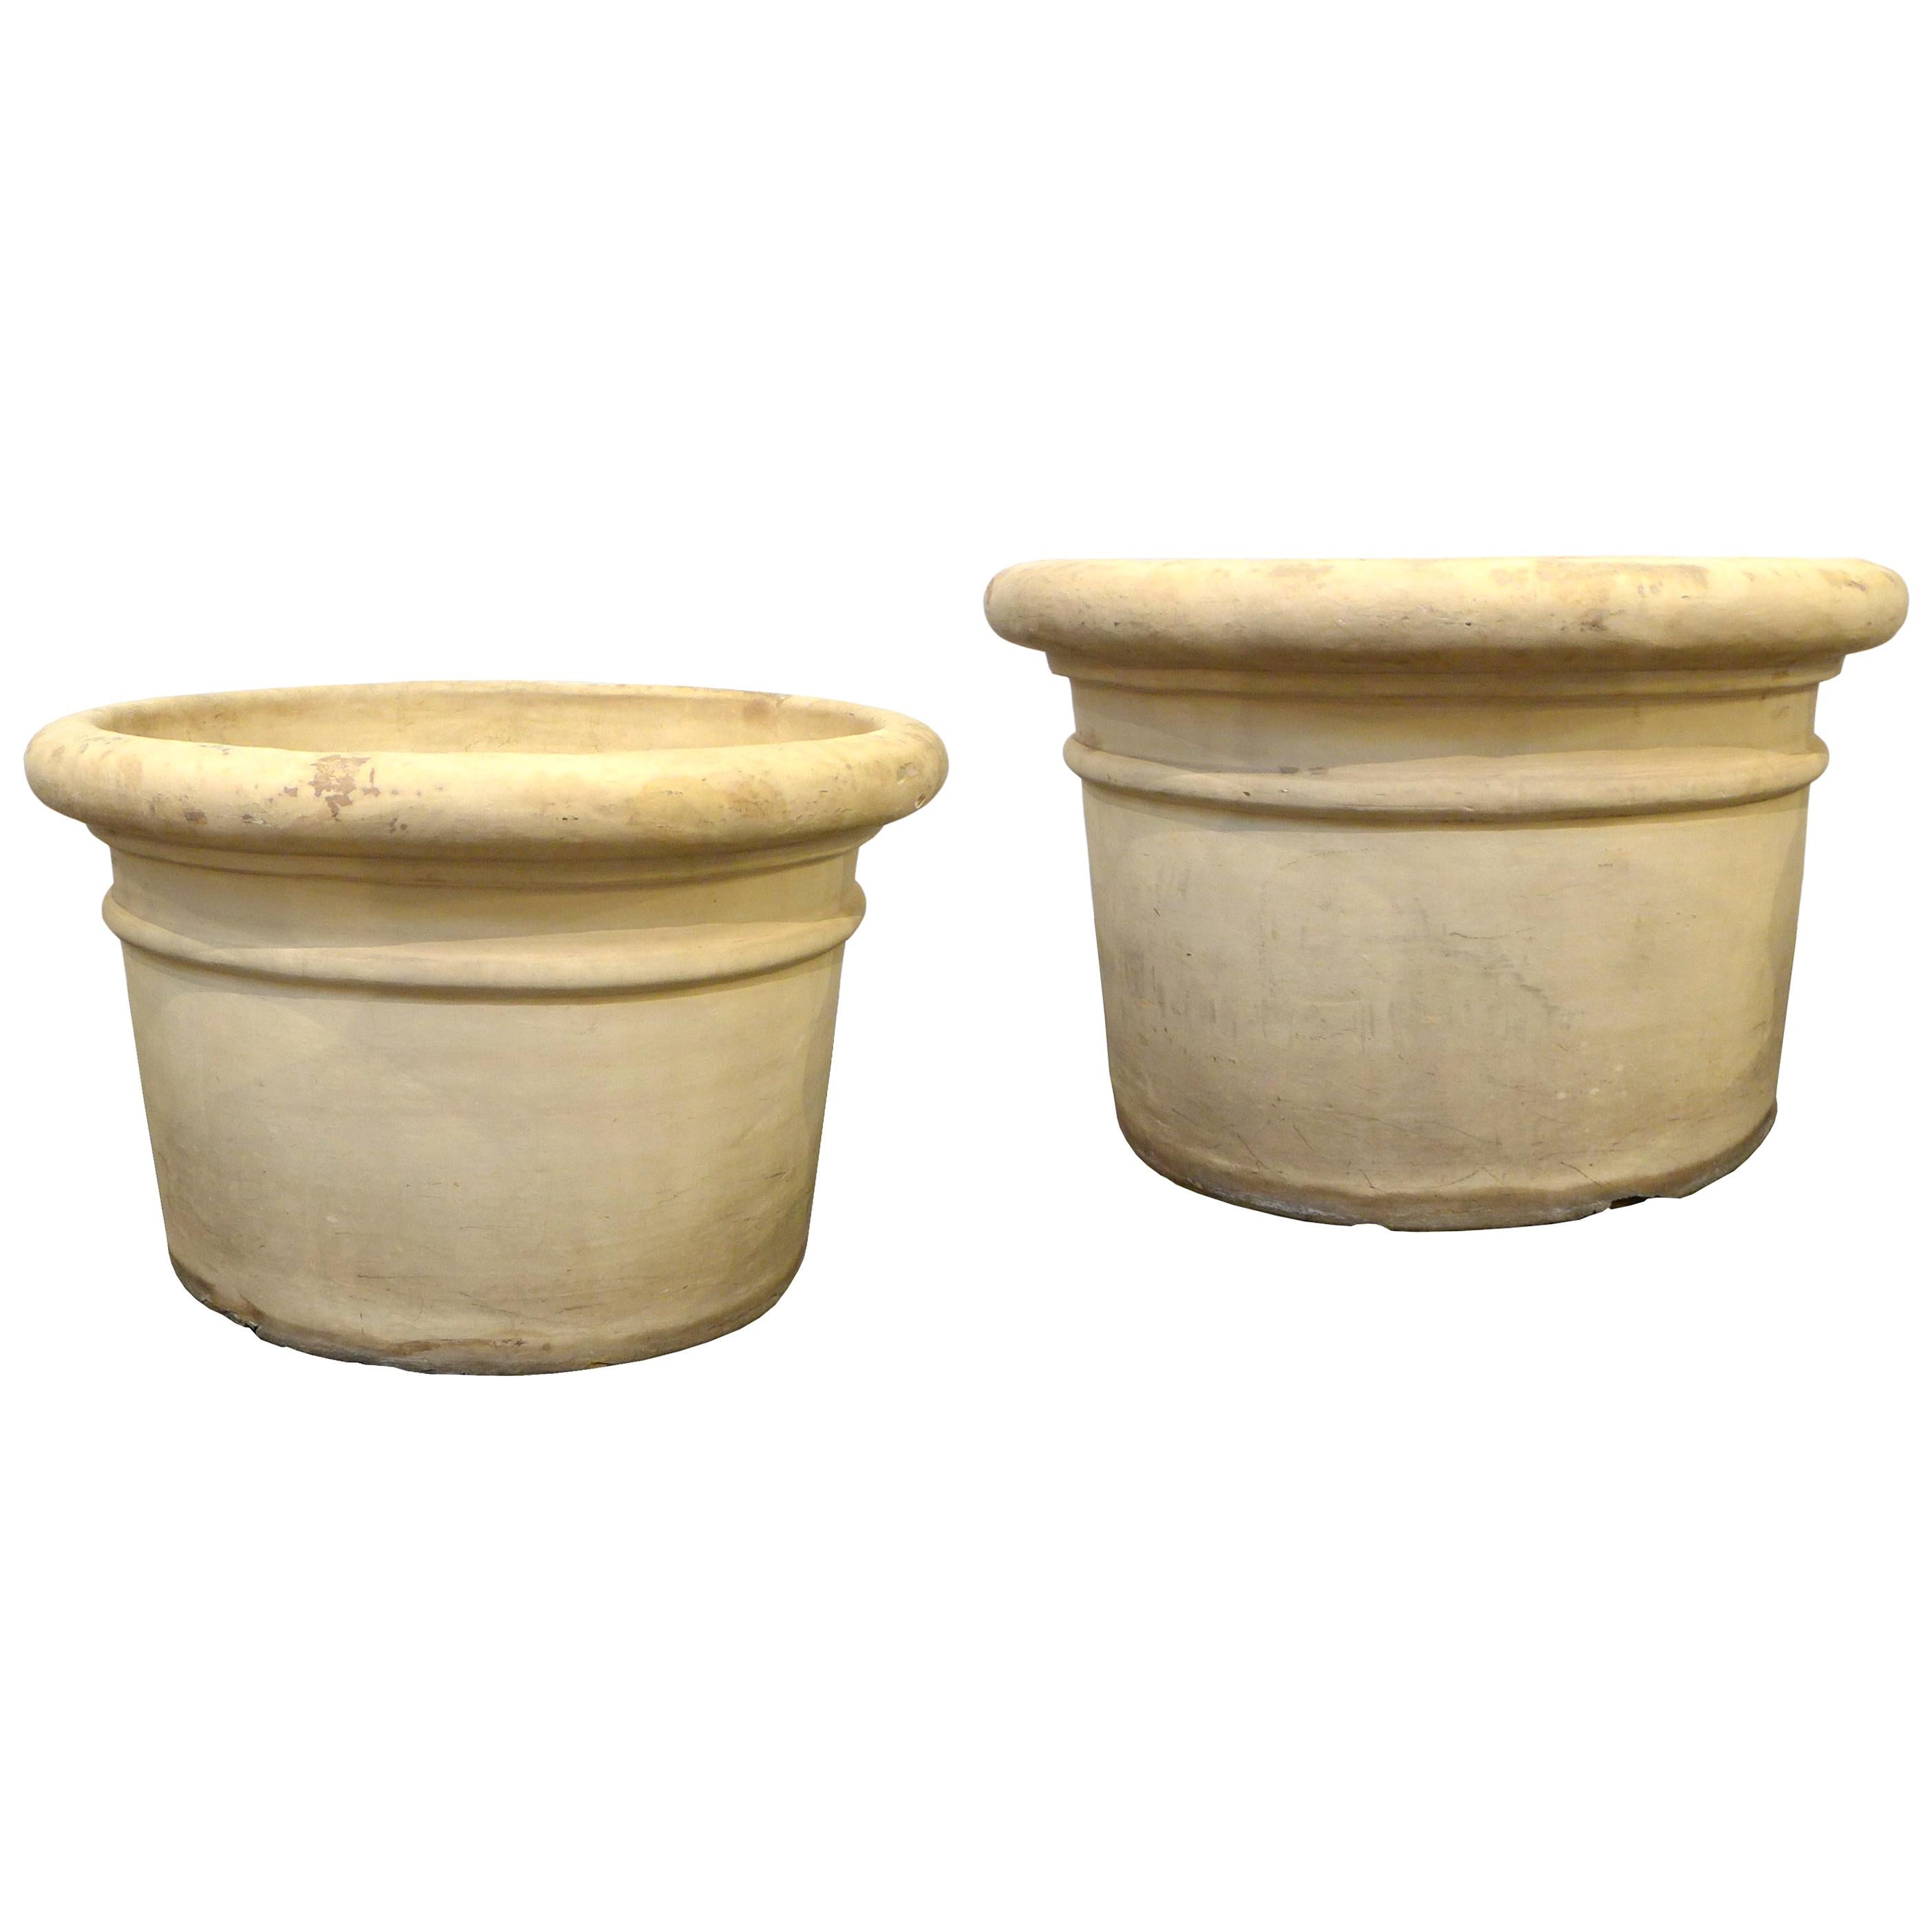 Pair of Large Bisque Terracotta Planters